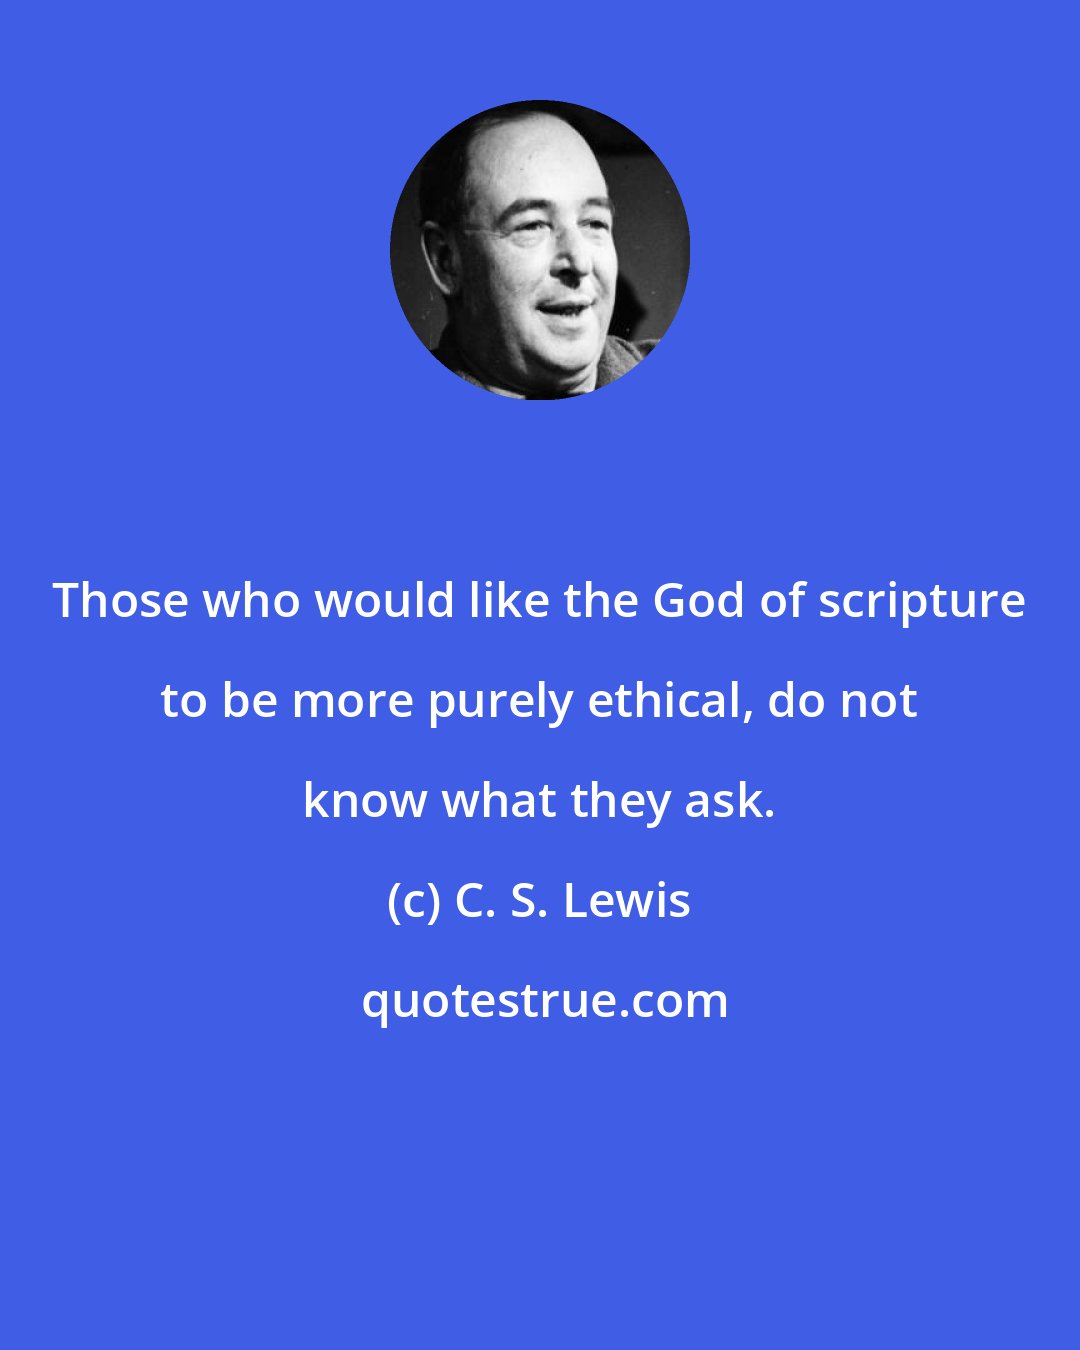 C. S. Lewis: Those who would like the God of scripture to be more purely ethical, do not know what they ask.